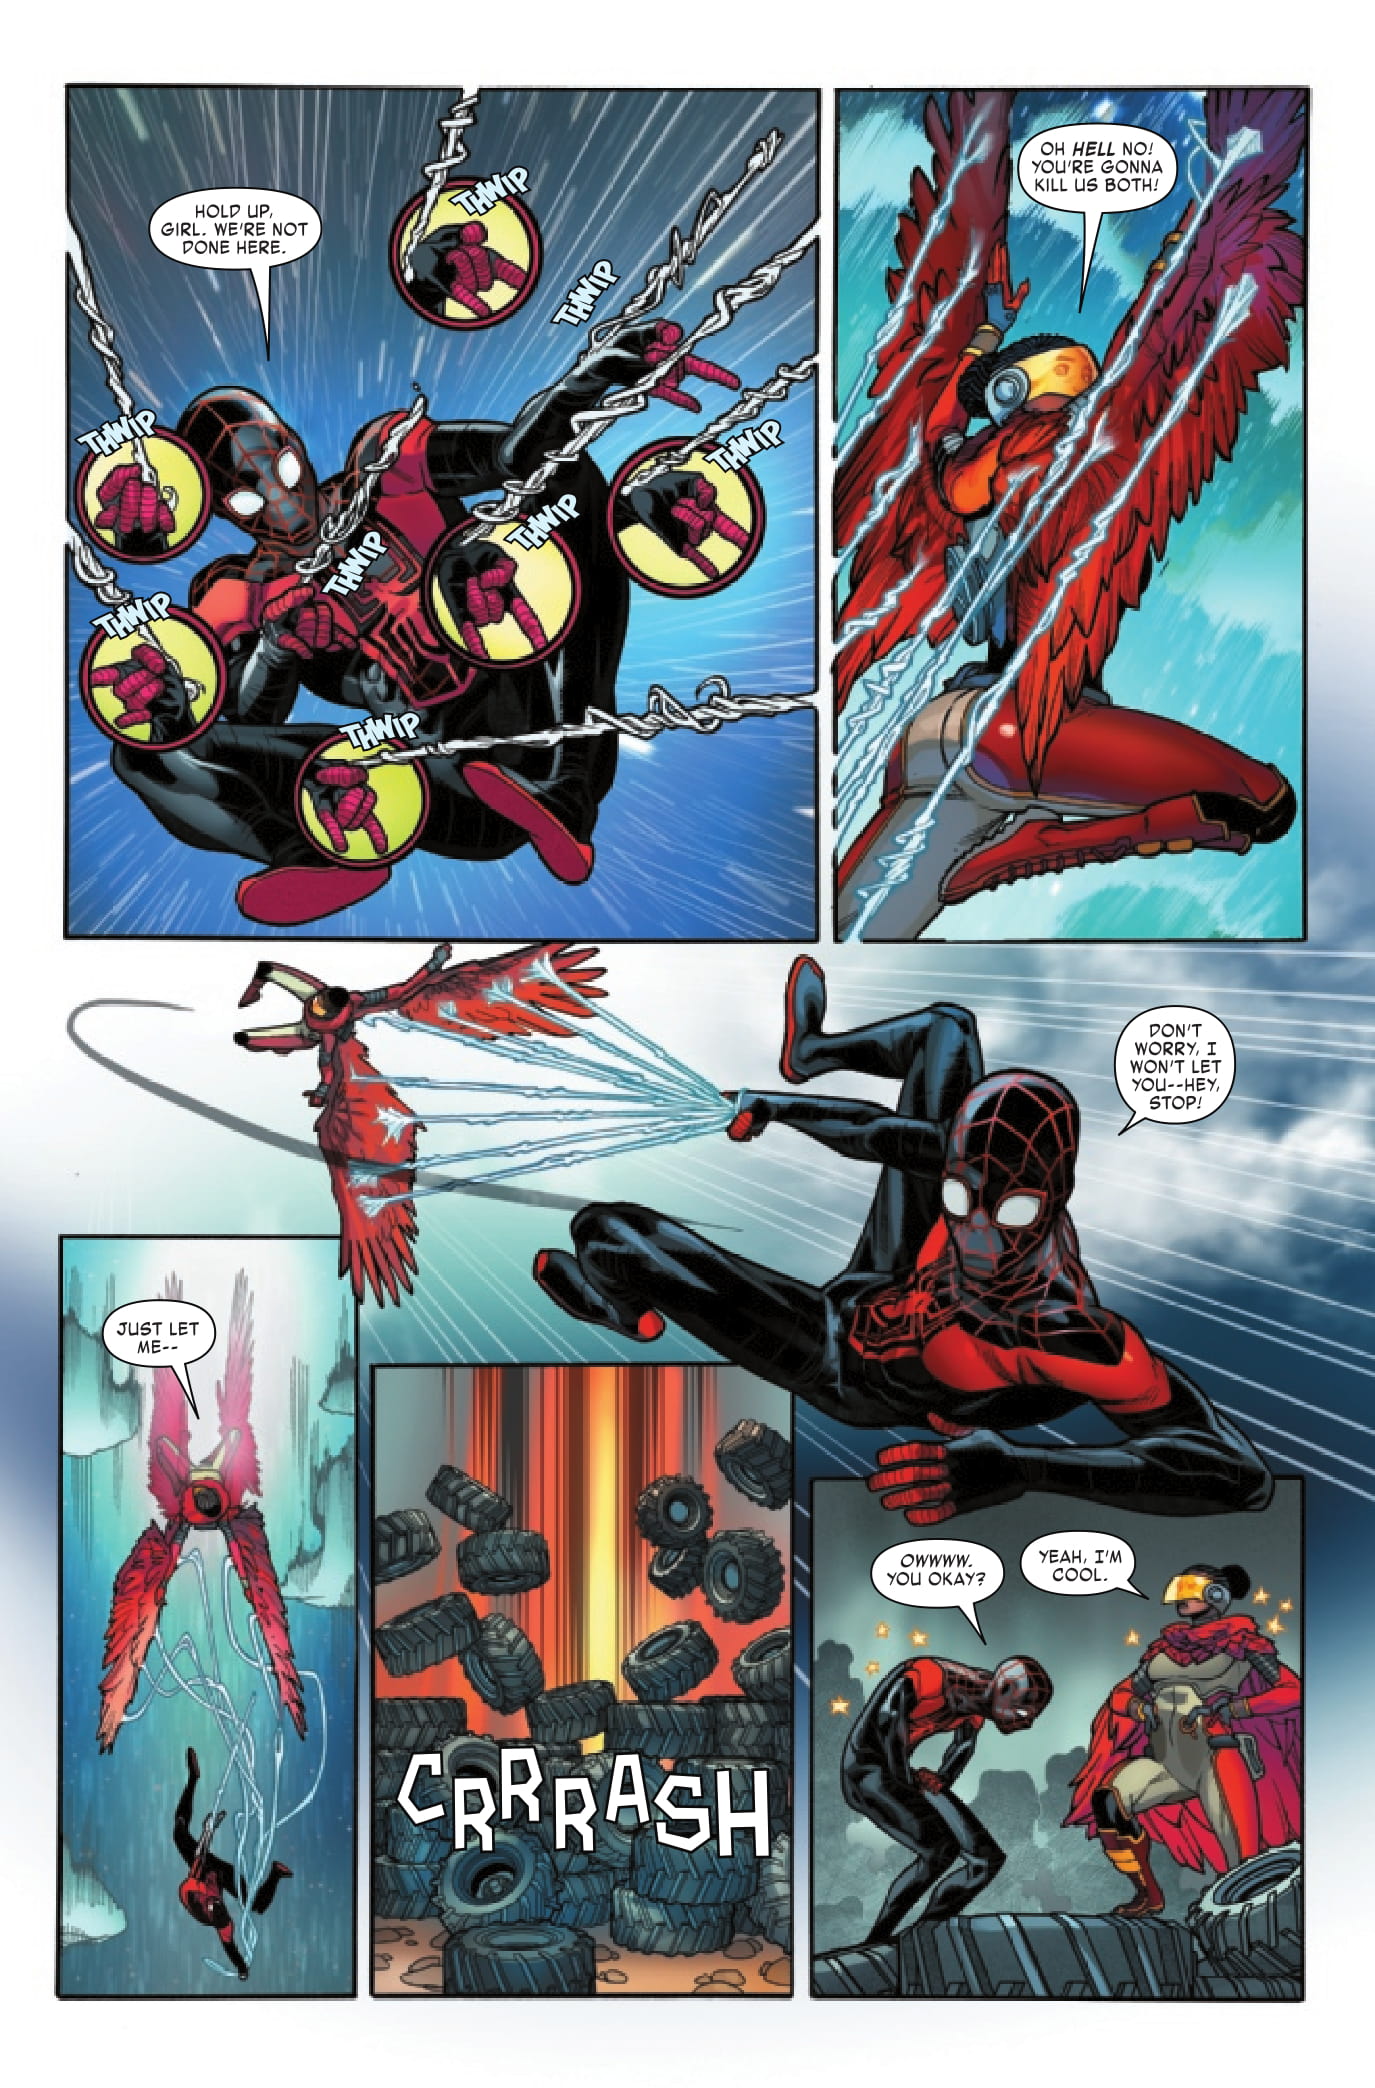 Miles Morales #6 preview page 3